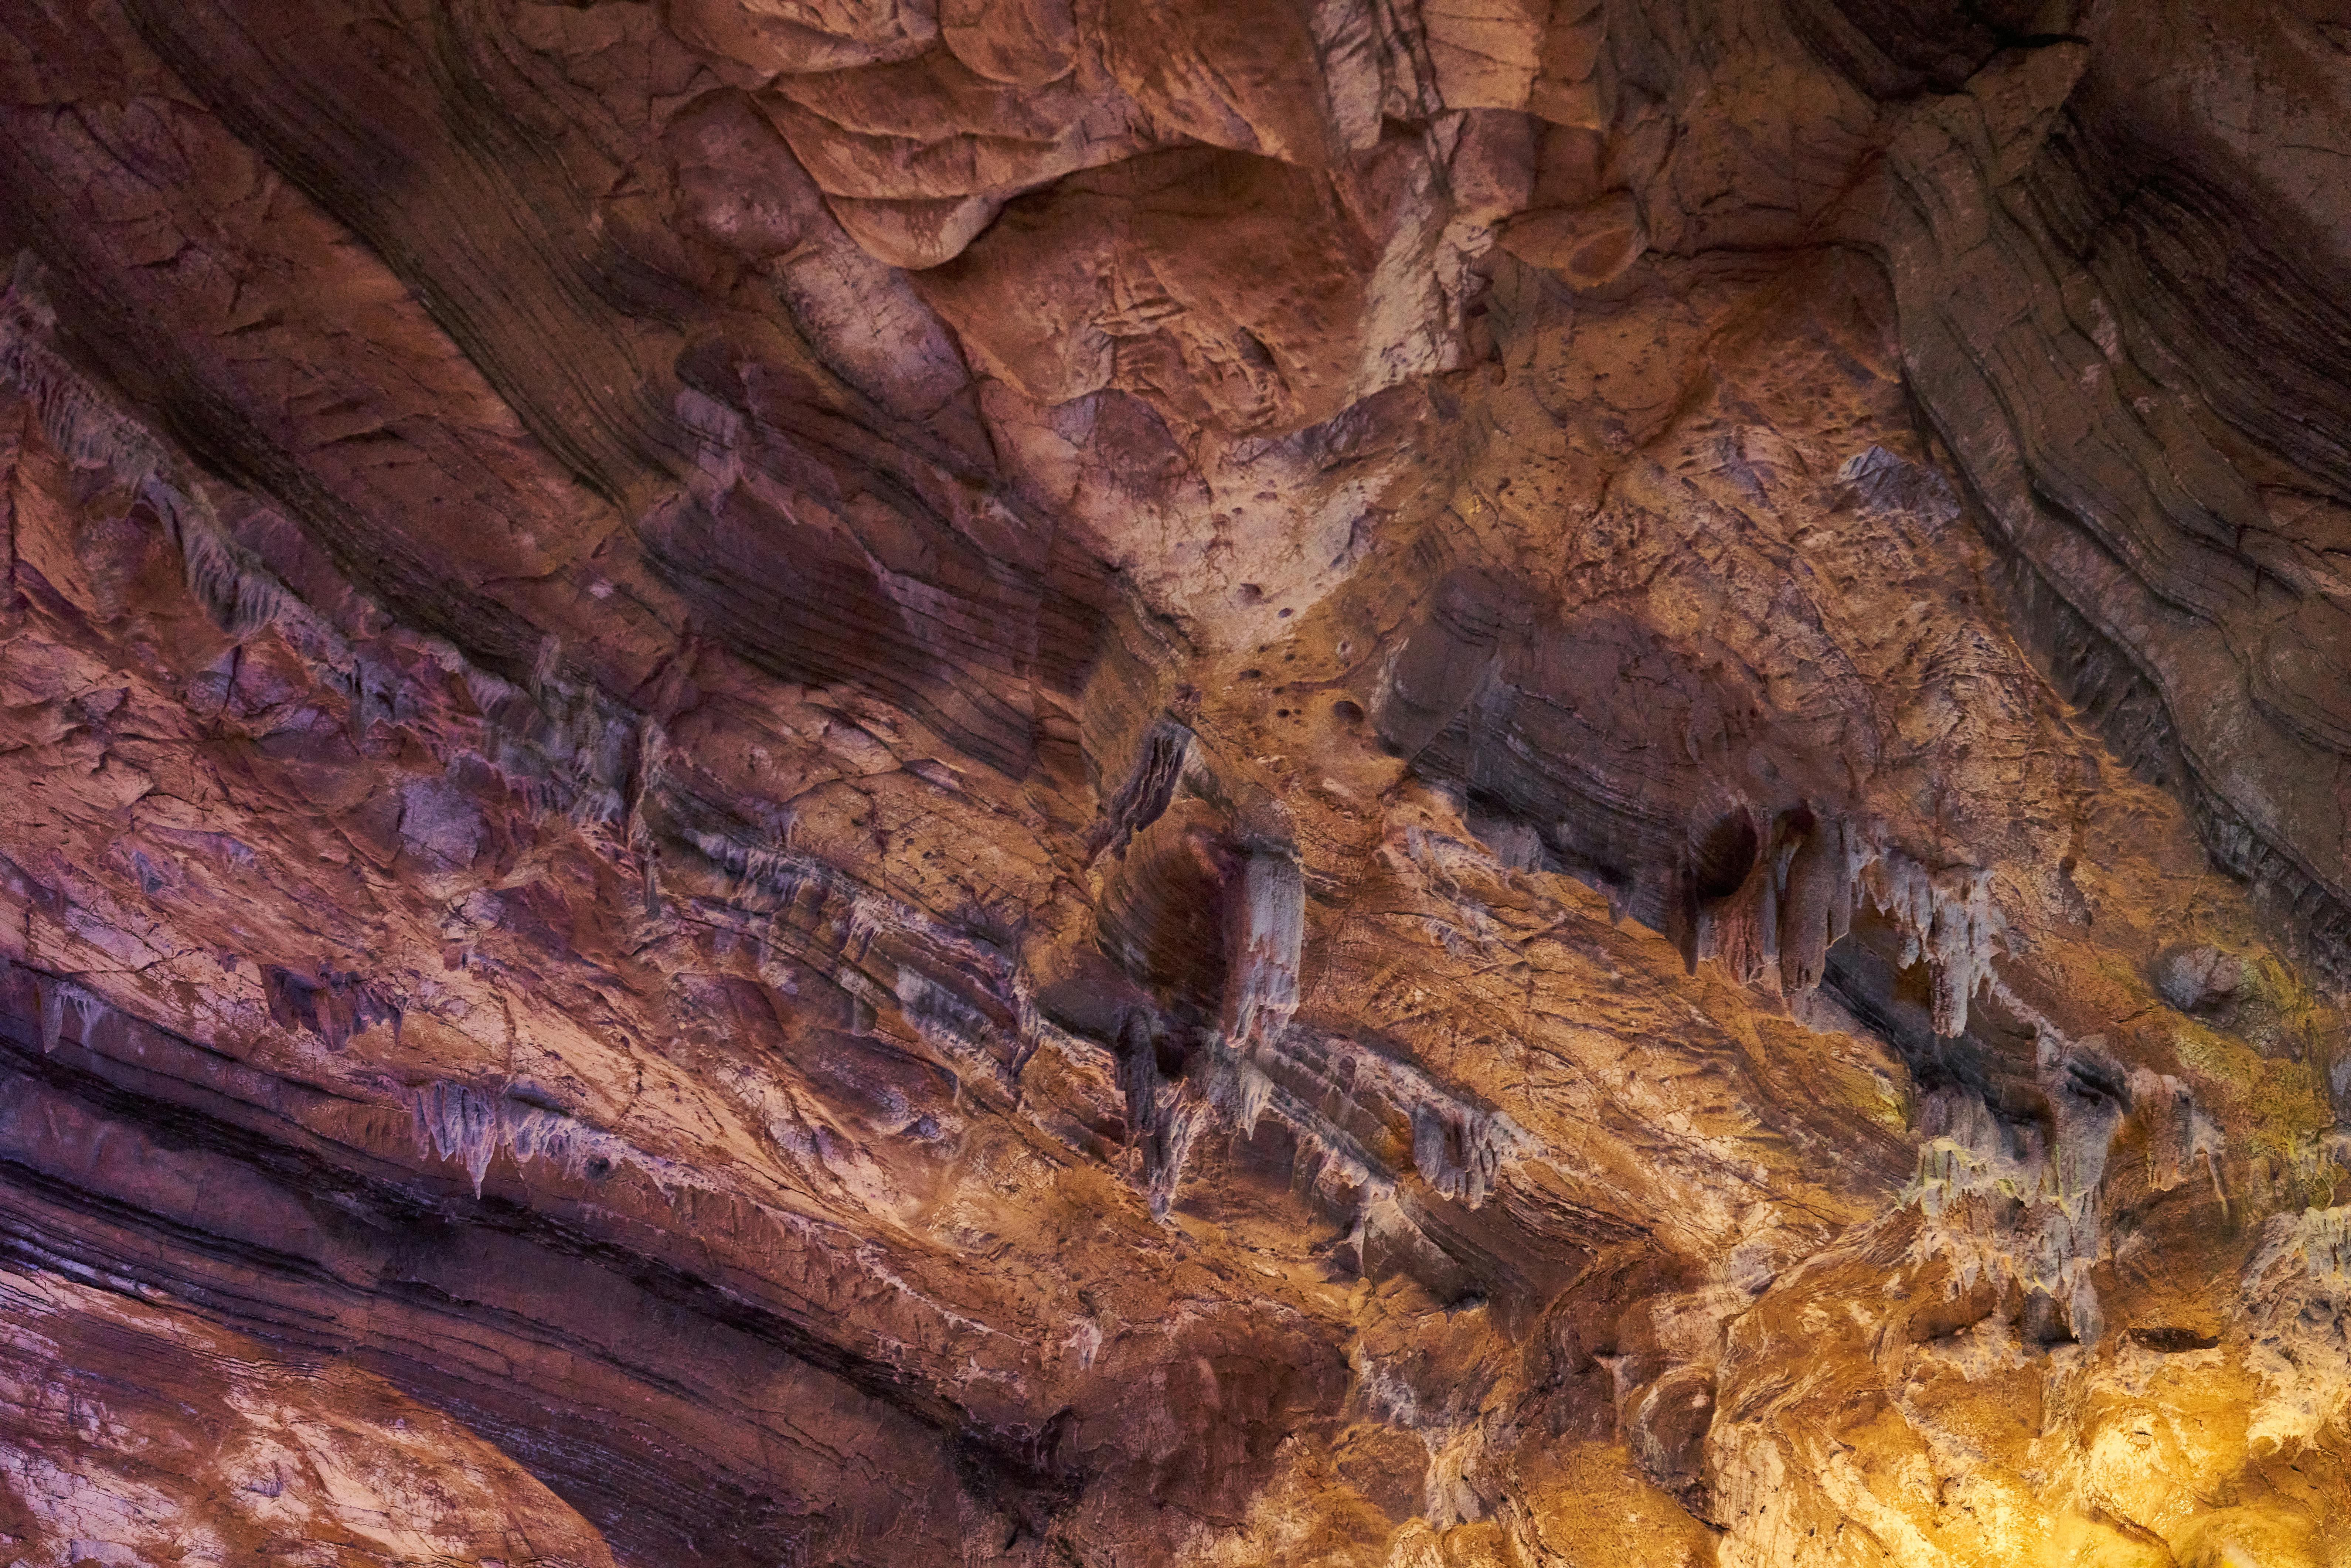 Can You Recommend Secret Caves Or Caverns That Are Open To Exploration?